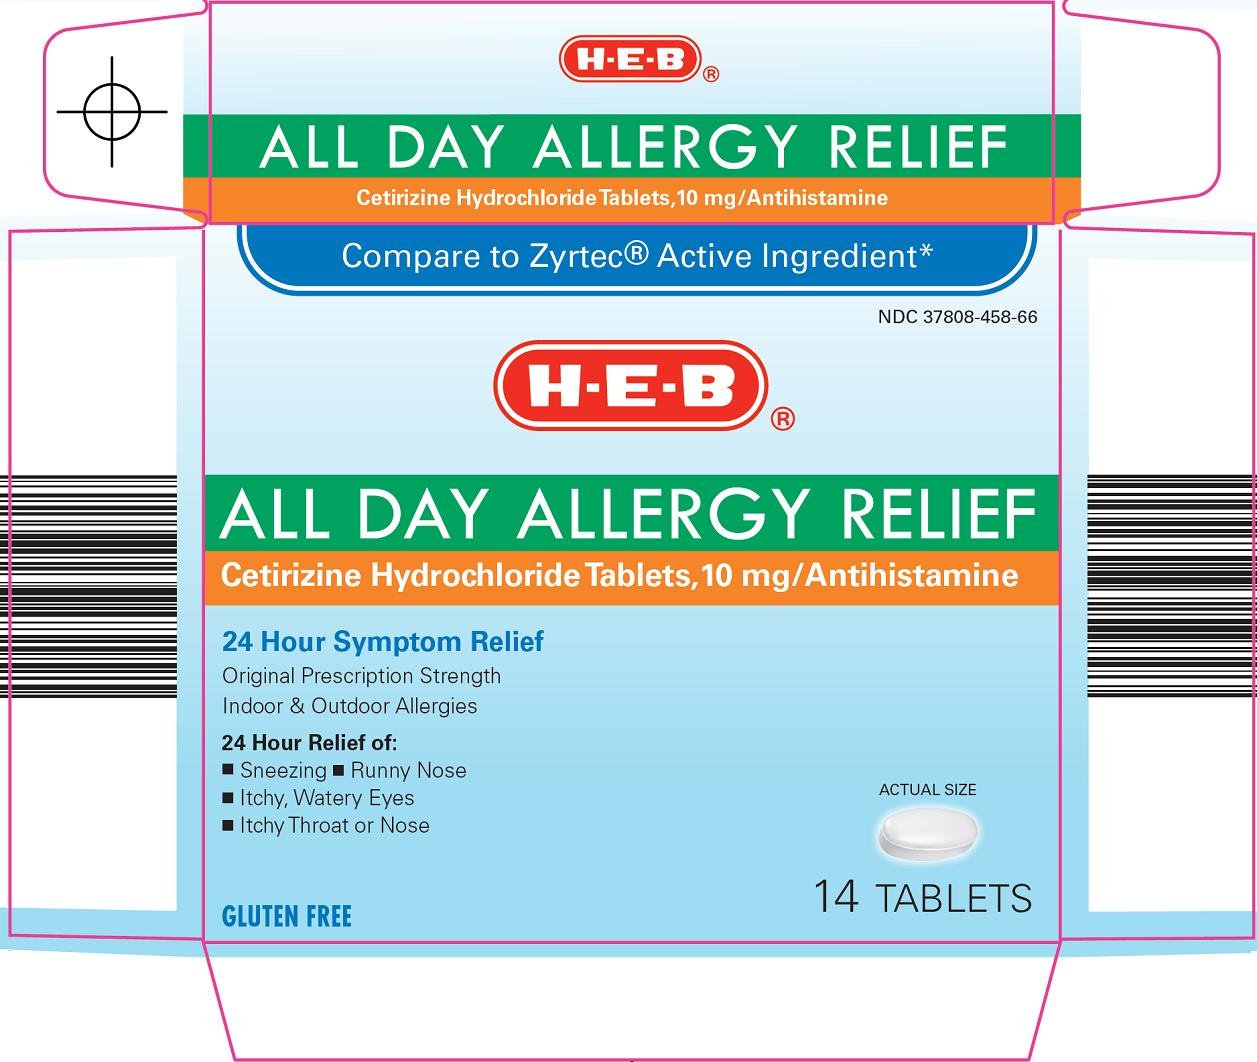 All Day Allergy Relief Carton Image 1